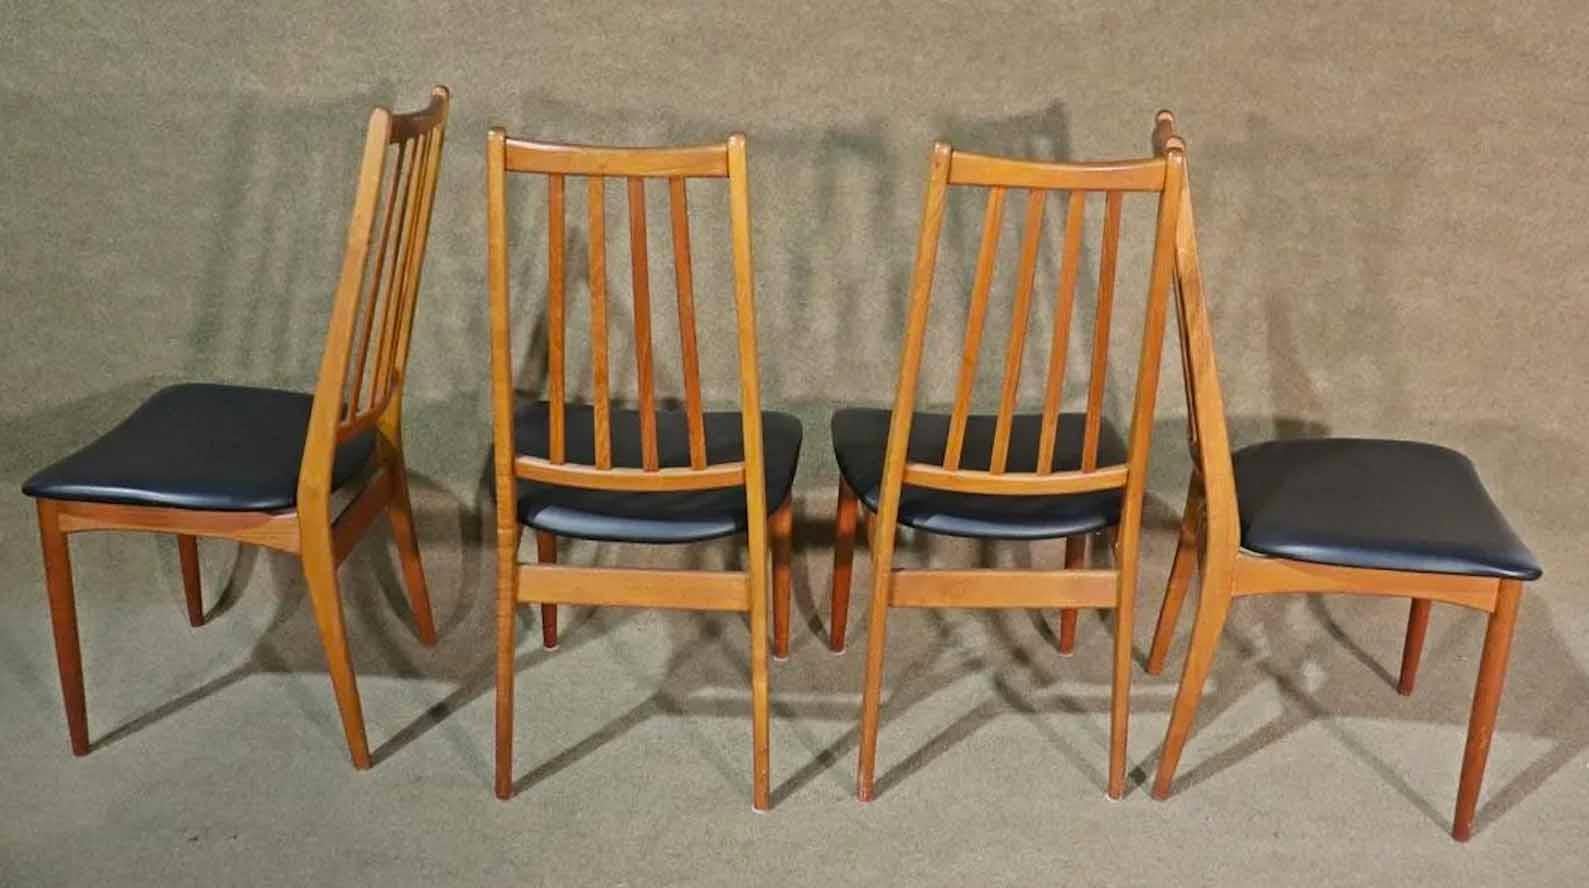 Mid-Century Modern dining chairs from Denmark. Teak wood frames with slat backs and floating vinyl seats.
Please confirm location.